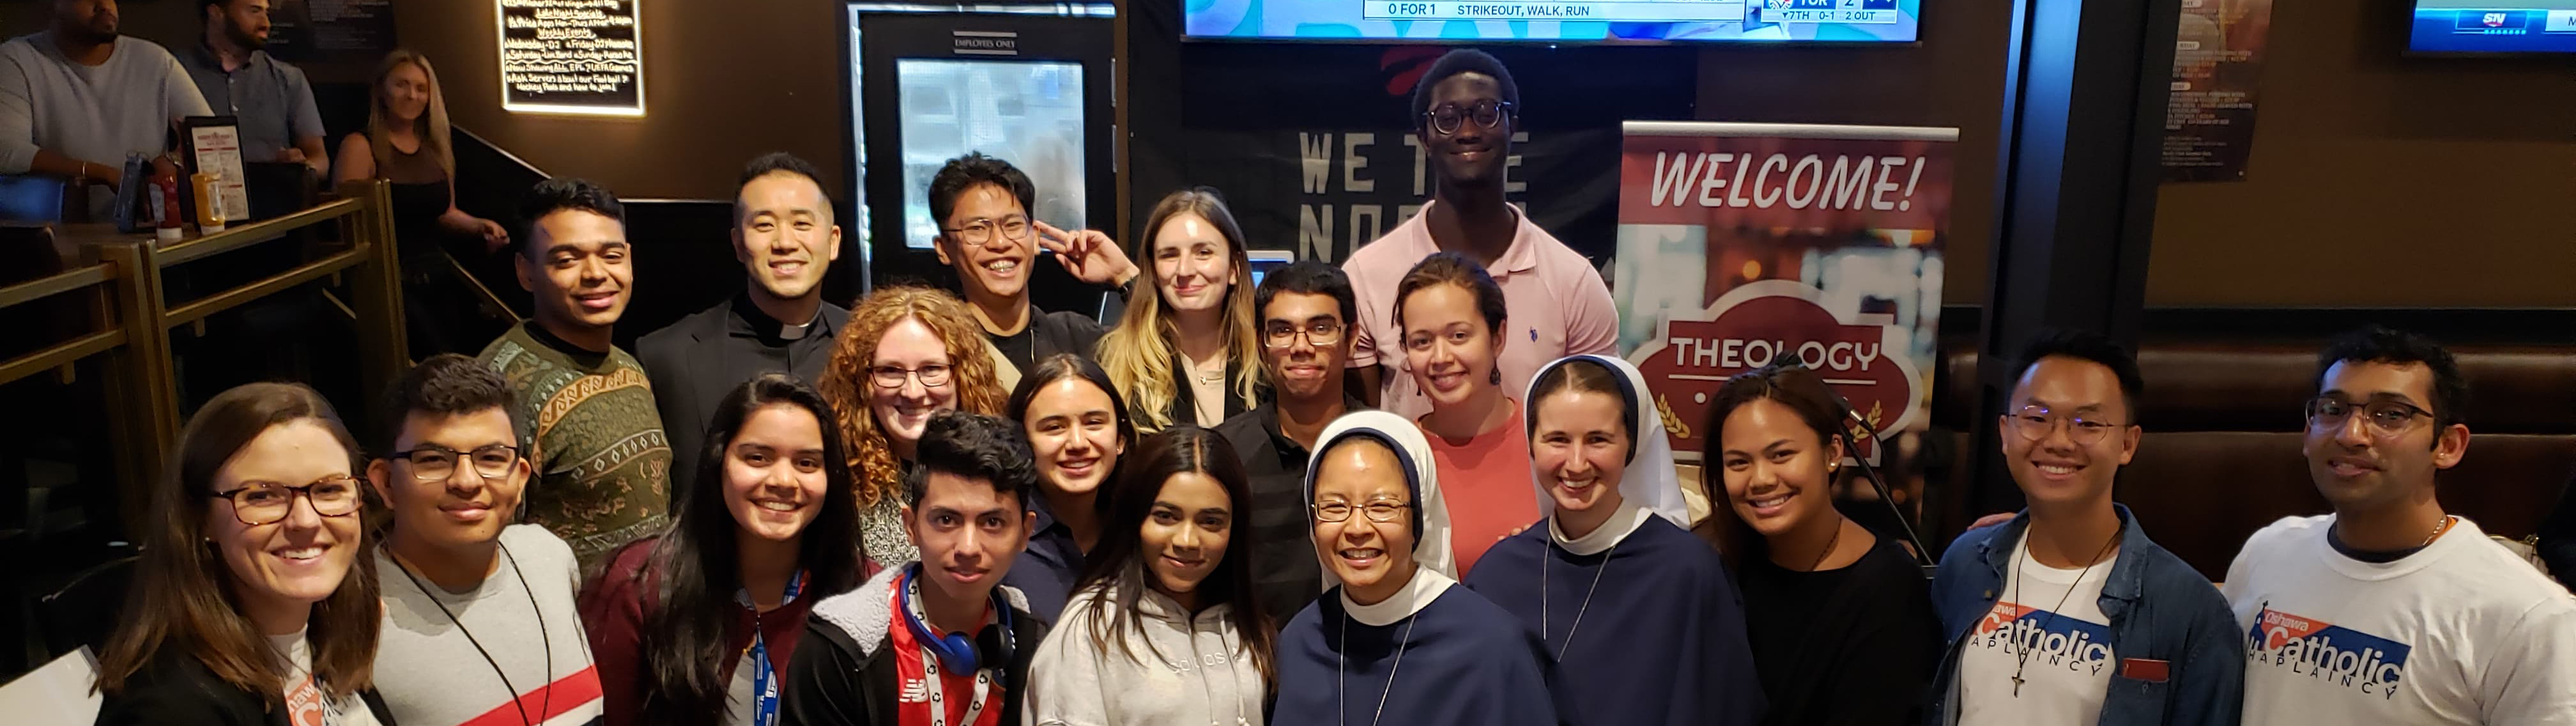 Group of male and female young adults with a few nuns gathered inside a pub/restaurant smiling for a photo